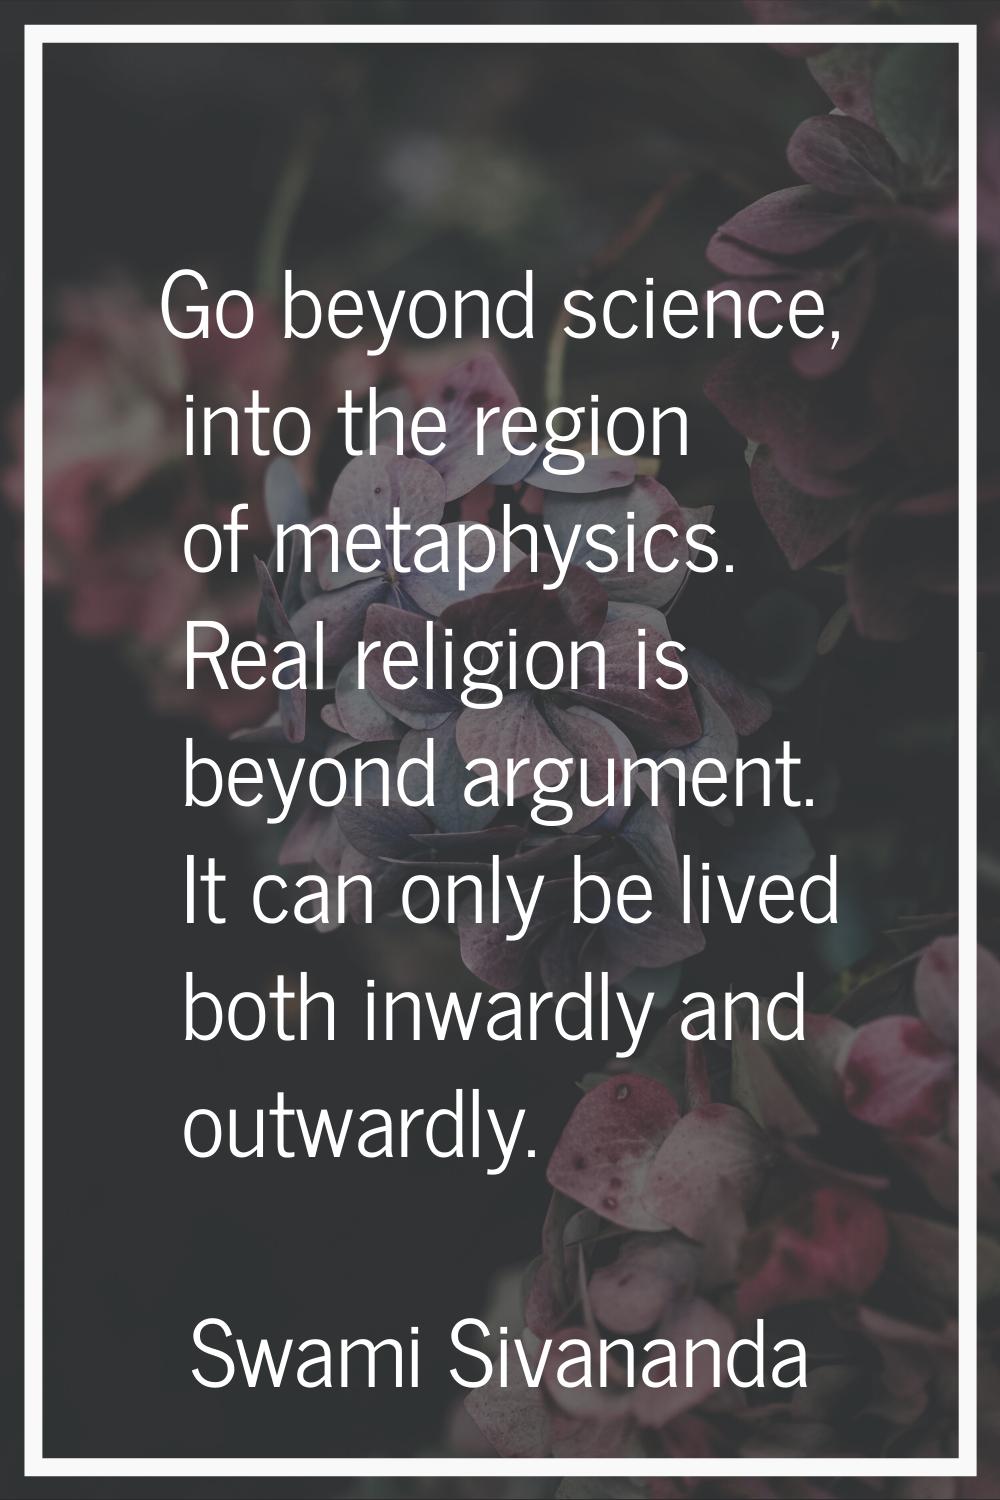 Go beyond science, into the region of metaphysics. Real religion is beyond argument. It can only be